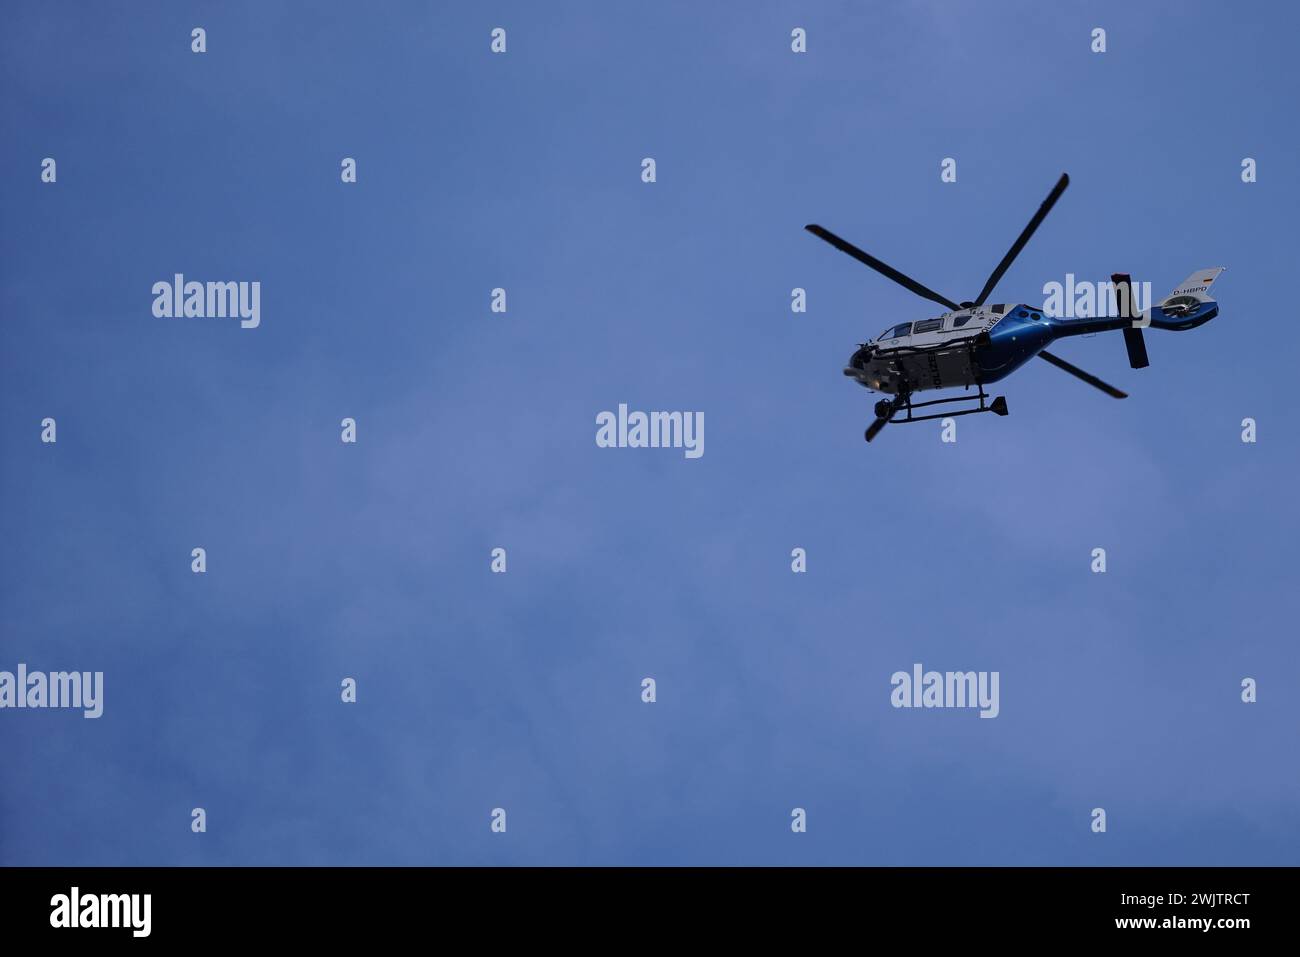 Airspace surveillance with a Police helicopter during the Munich Security Conference. Stock Photo